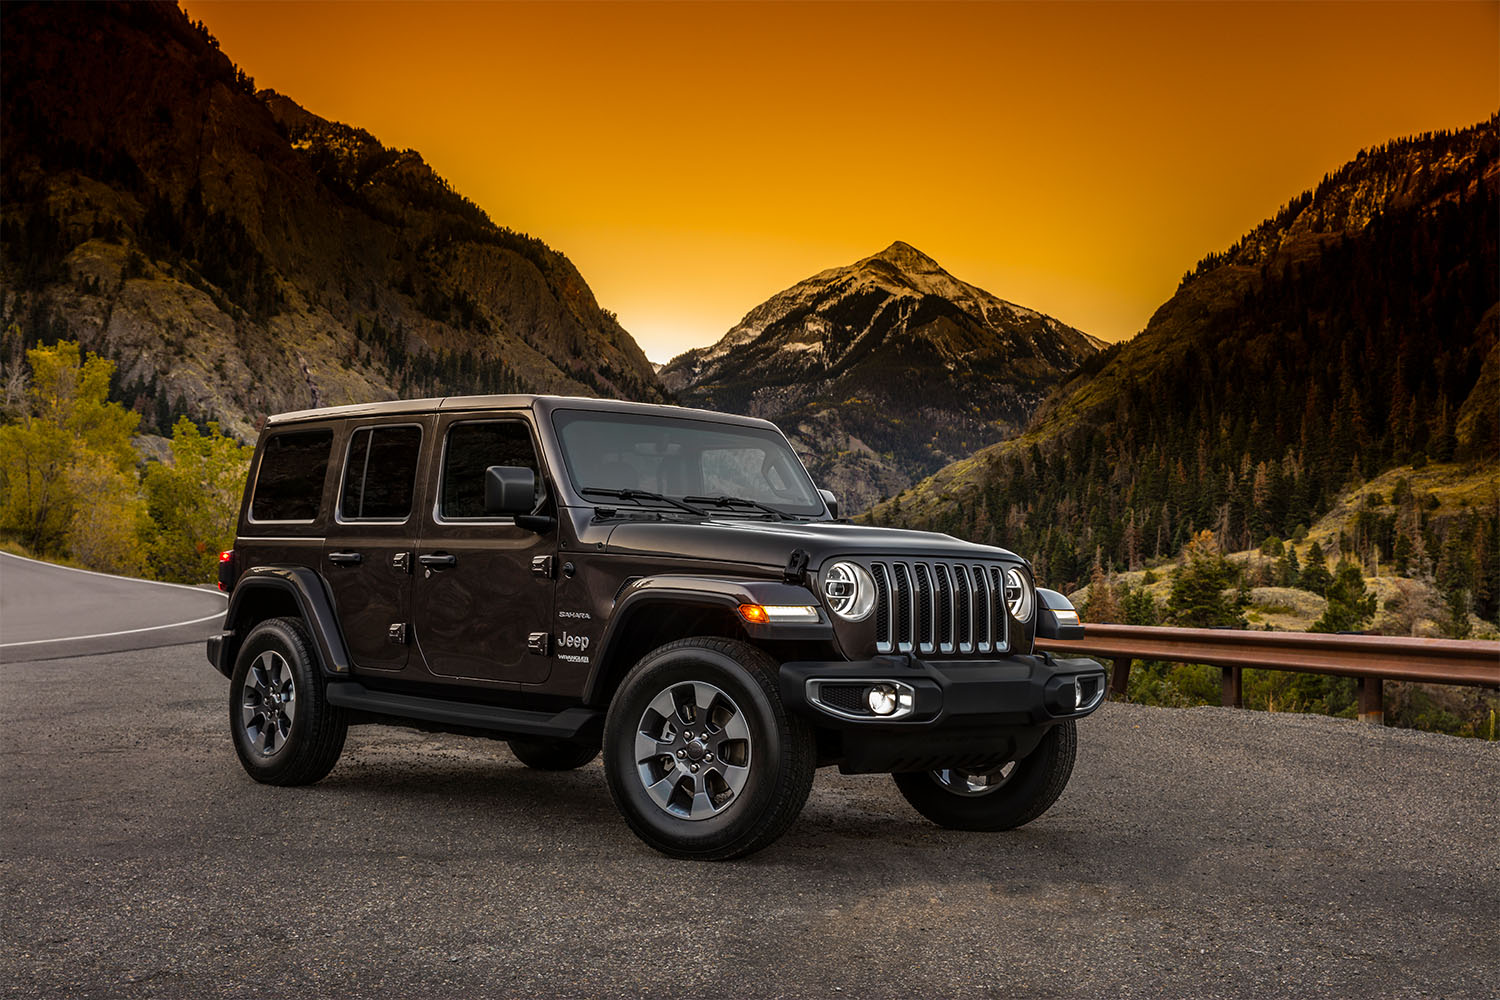 Lease a Jeep in Columbus, OH